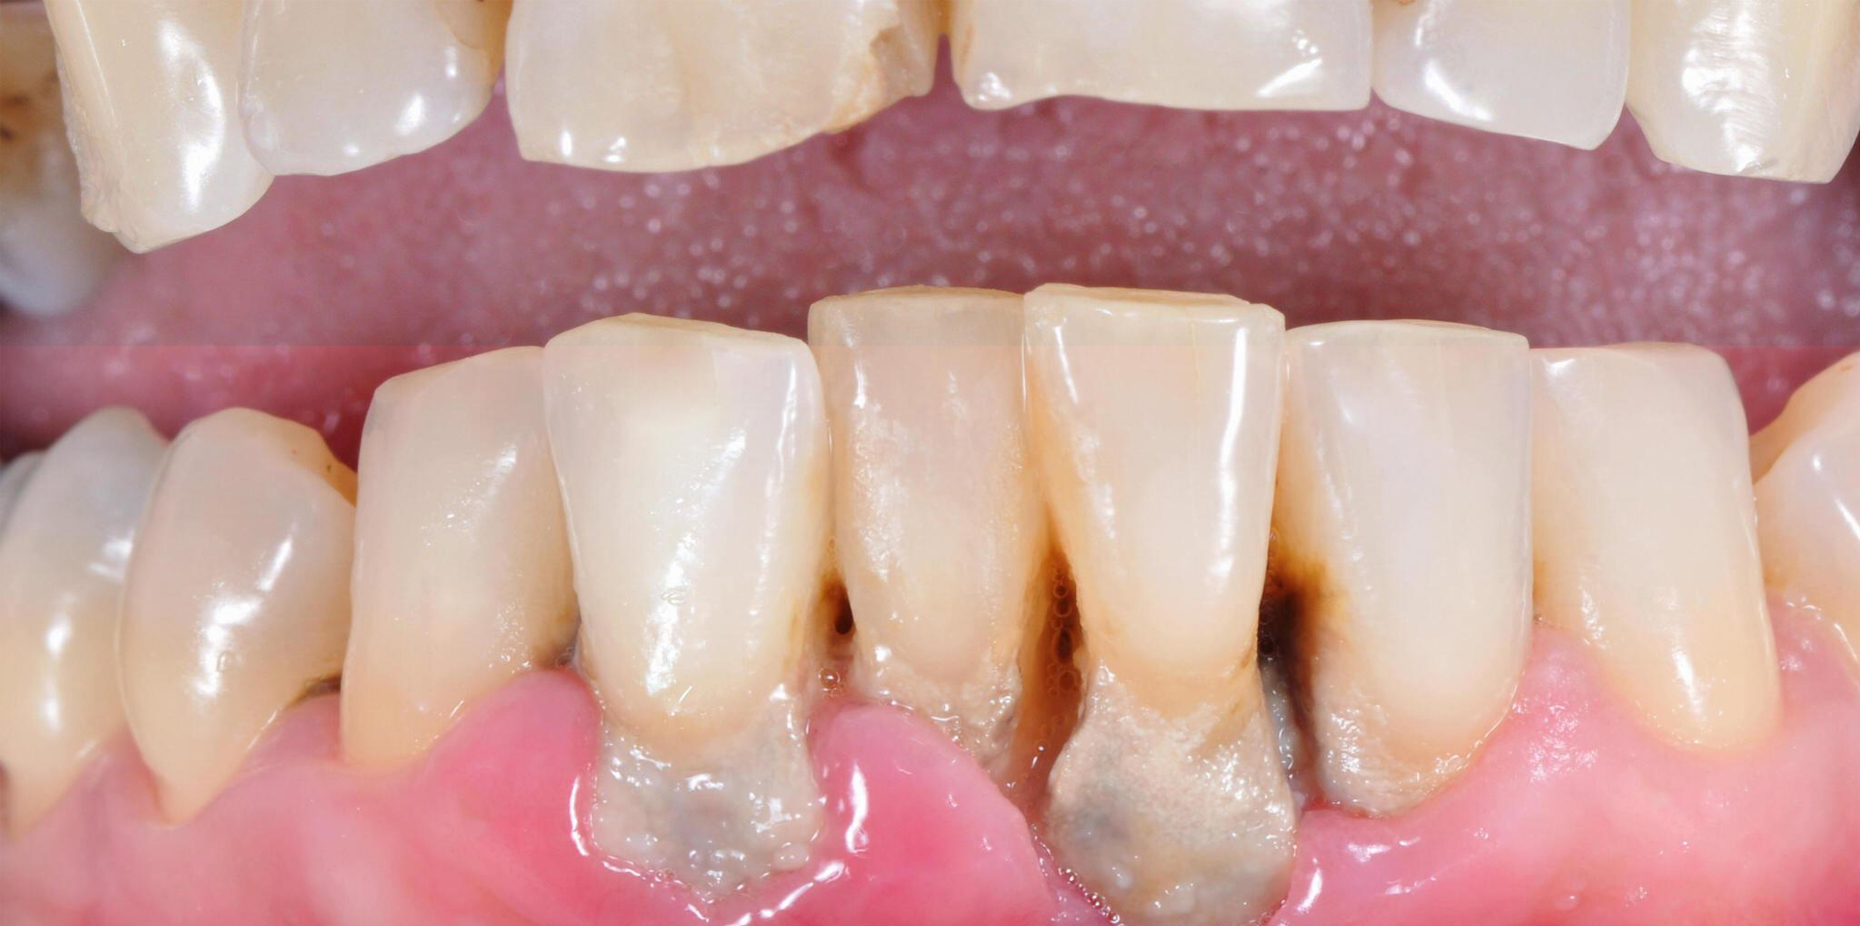 Periodontitis: Types, Stages, Symptoms, Causes, and Treatment